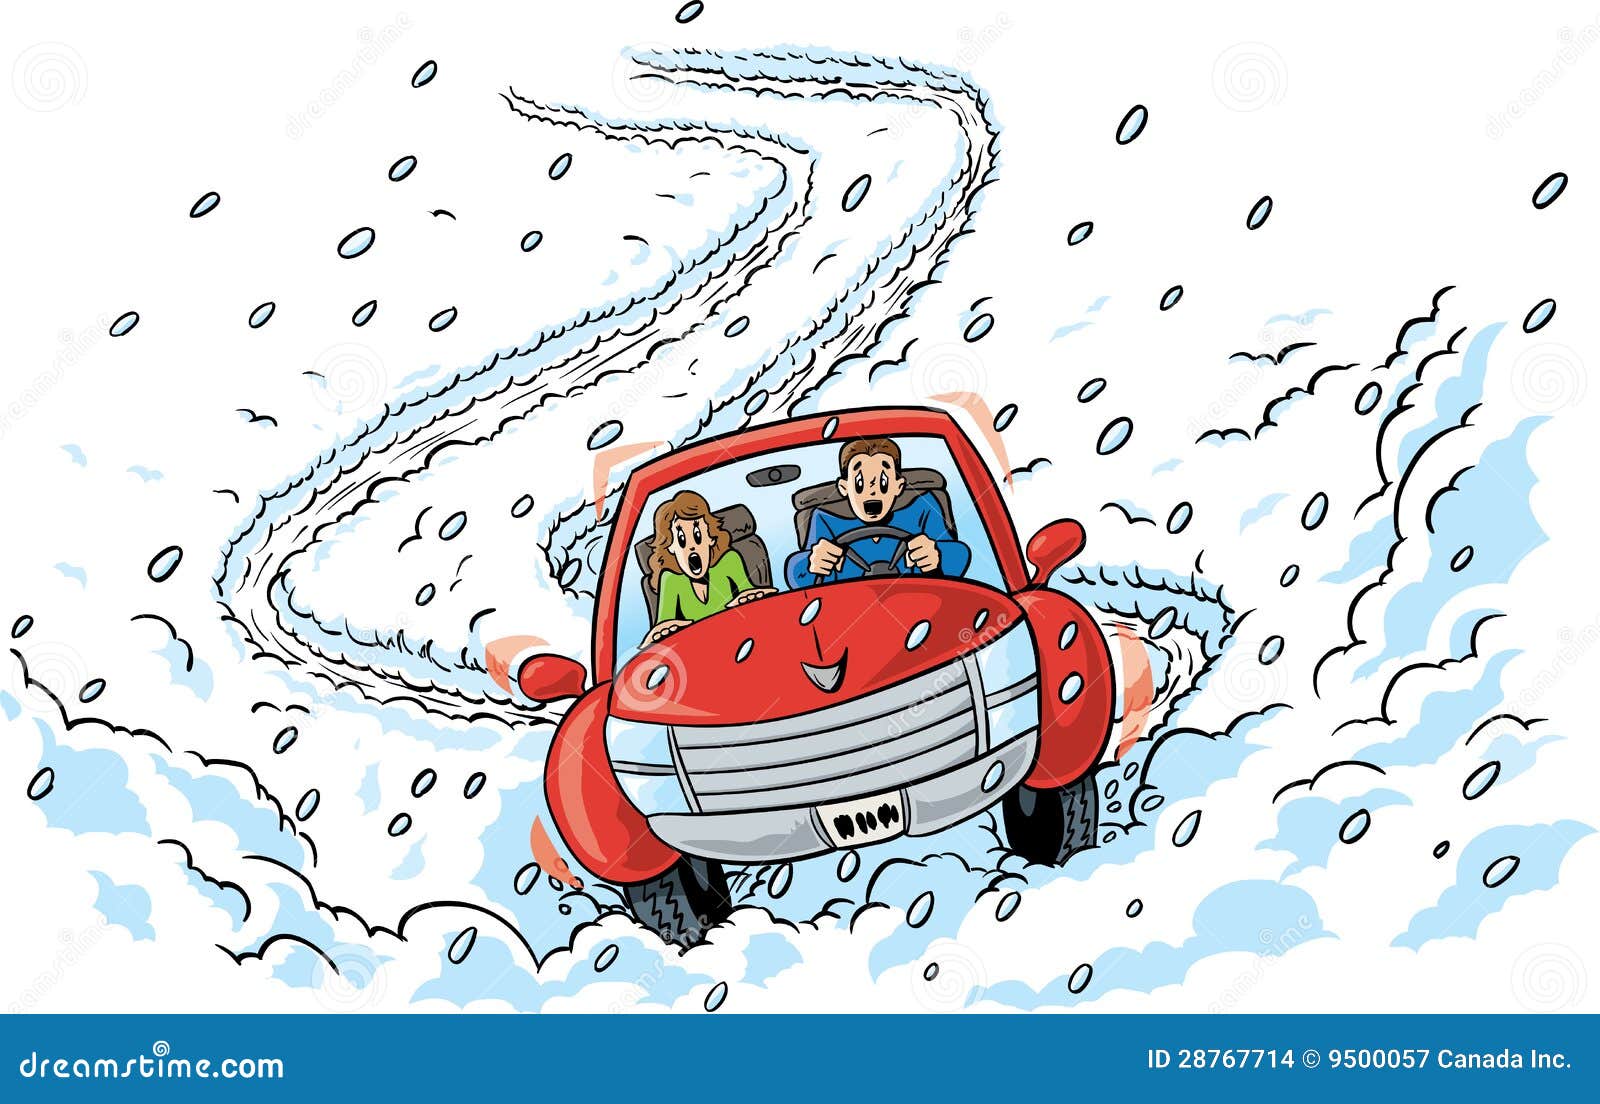 winter driving clipart - photo #3